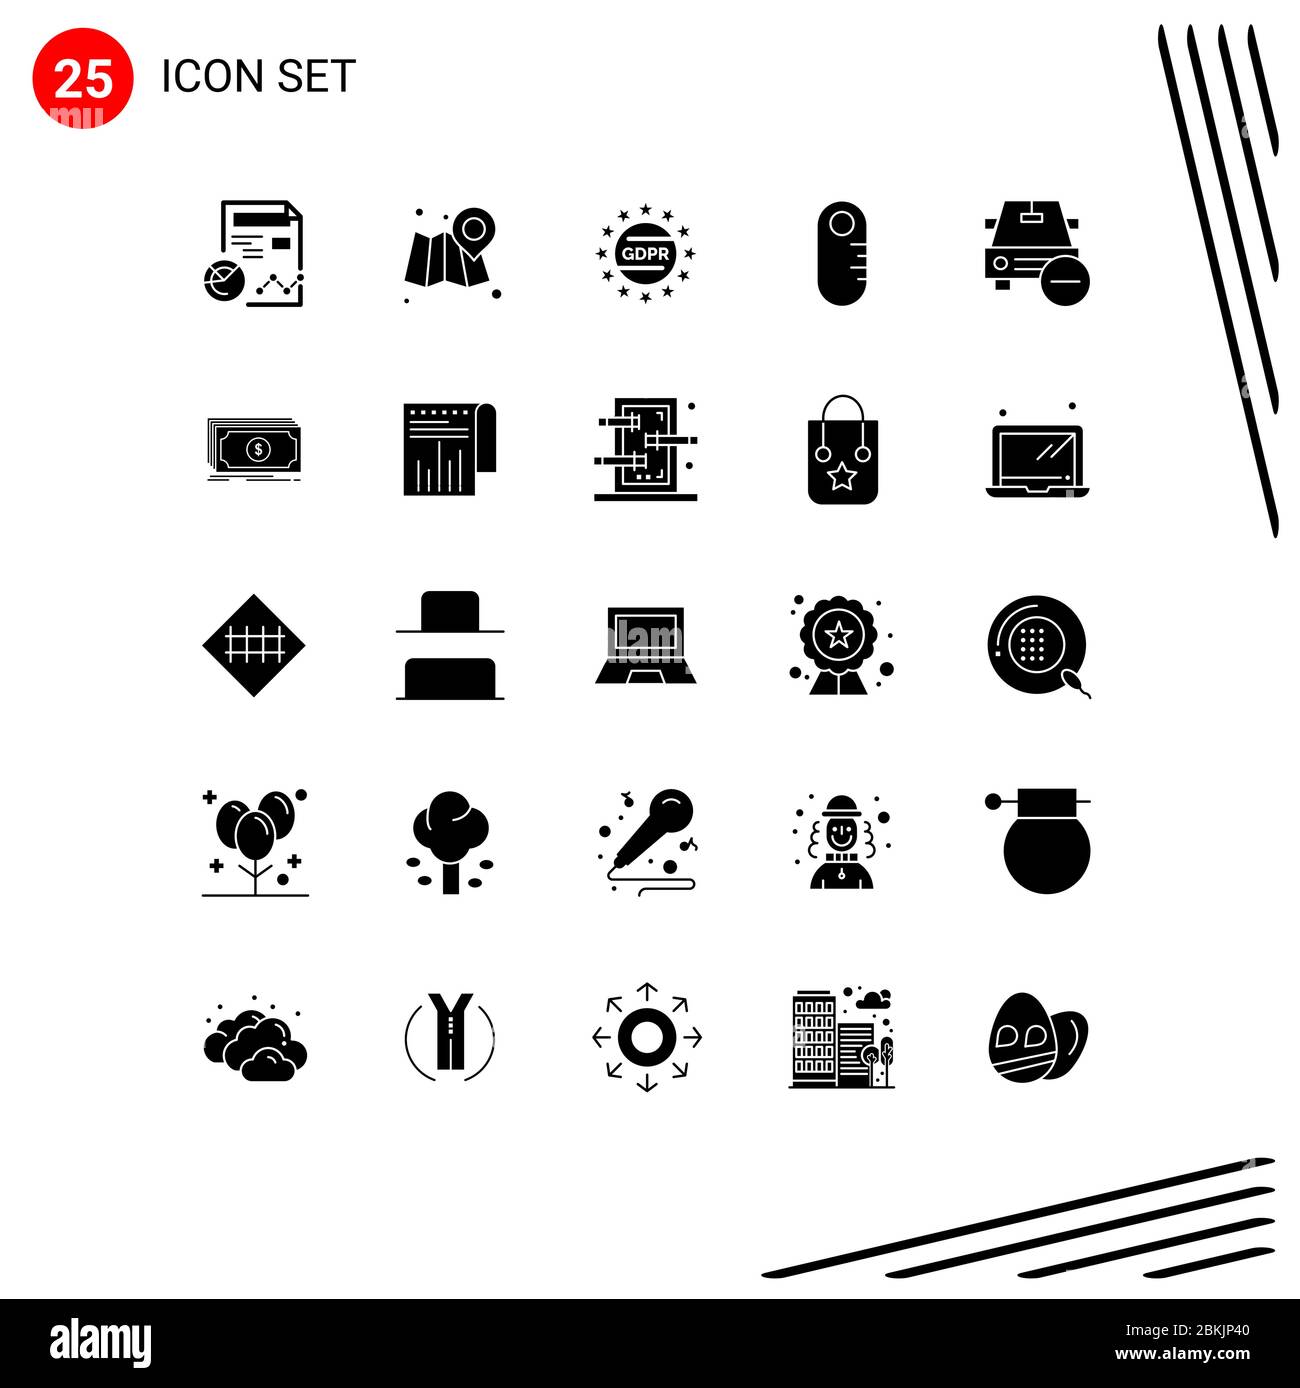 Mobile Interface Solid Glyph Set of 25 Pictograms of less, car, gdpr, audiometer, grownup Editable Vector Design Elements Stock Vector